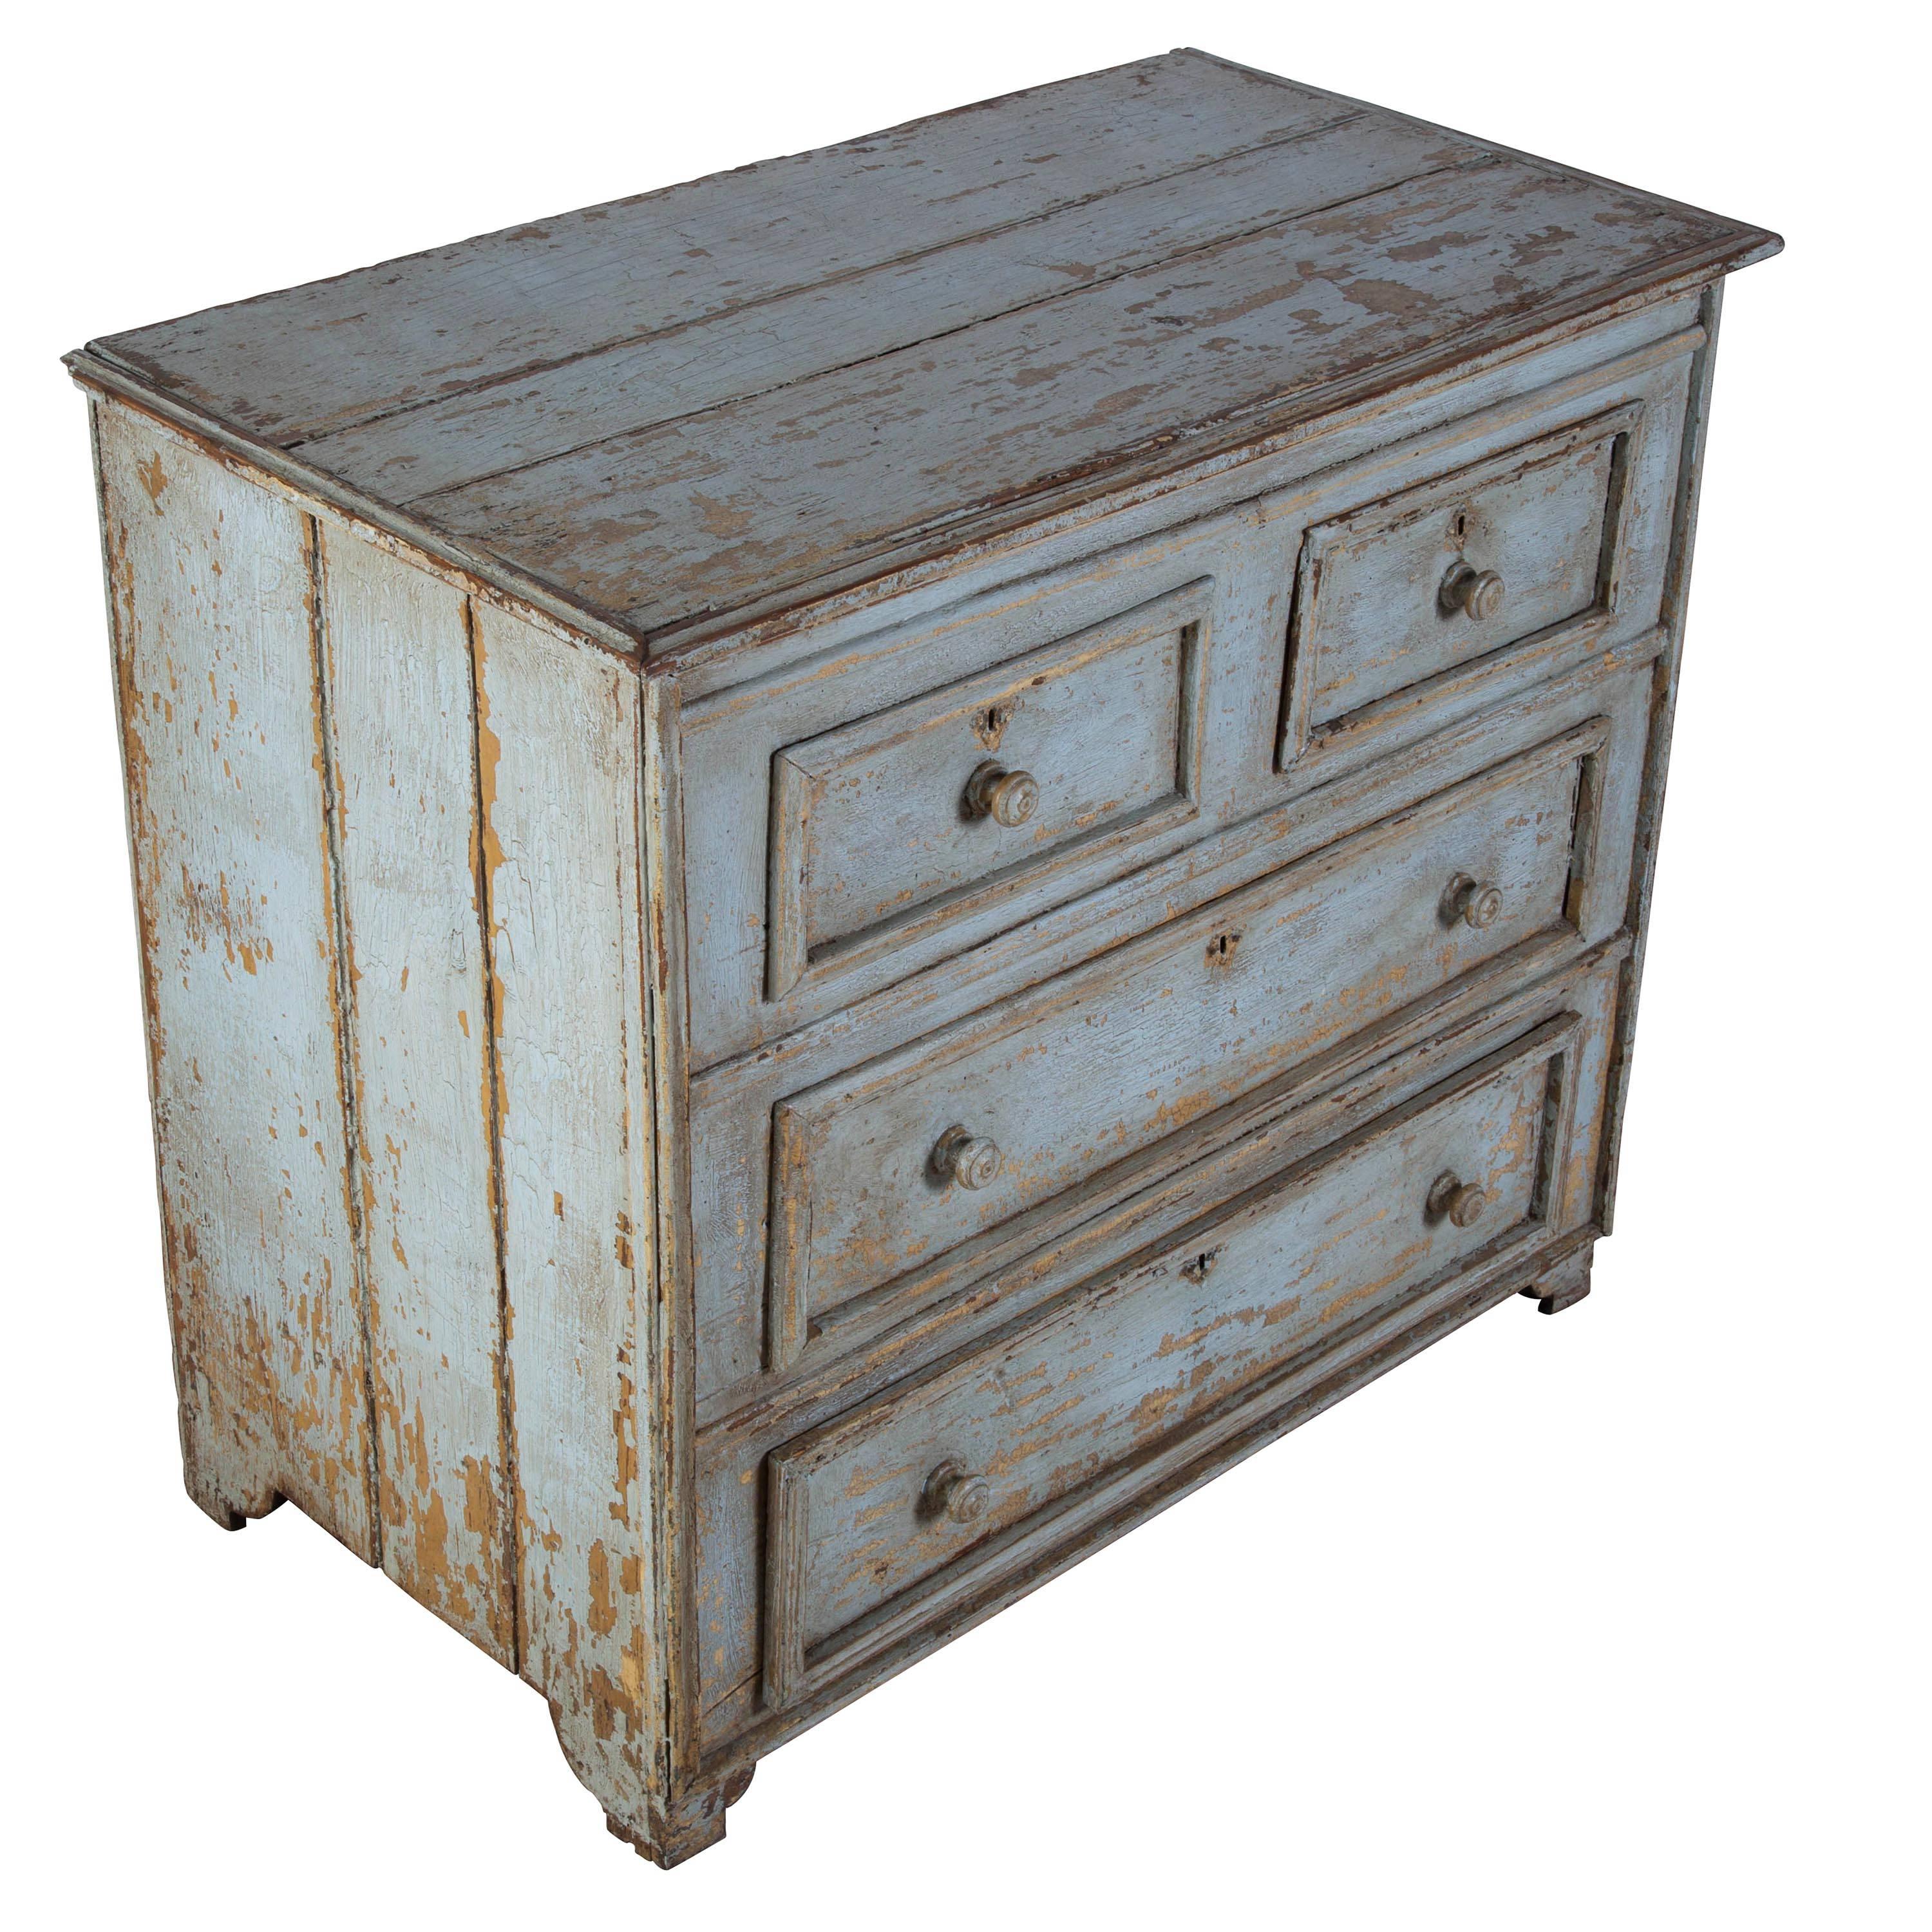 An early 19th century Provincial Italian chest of drawers in remnants of early paint.